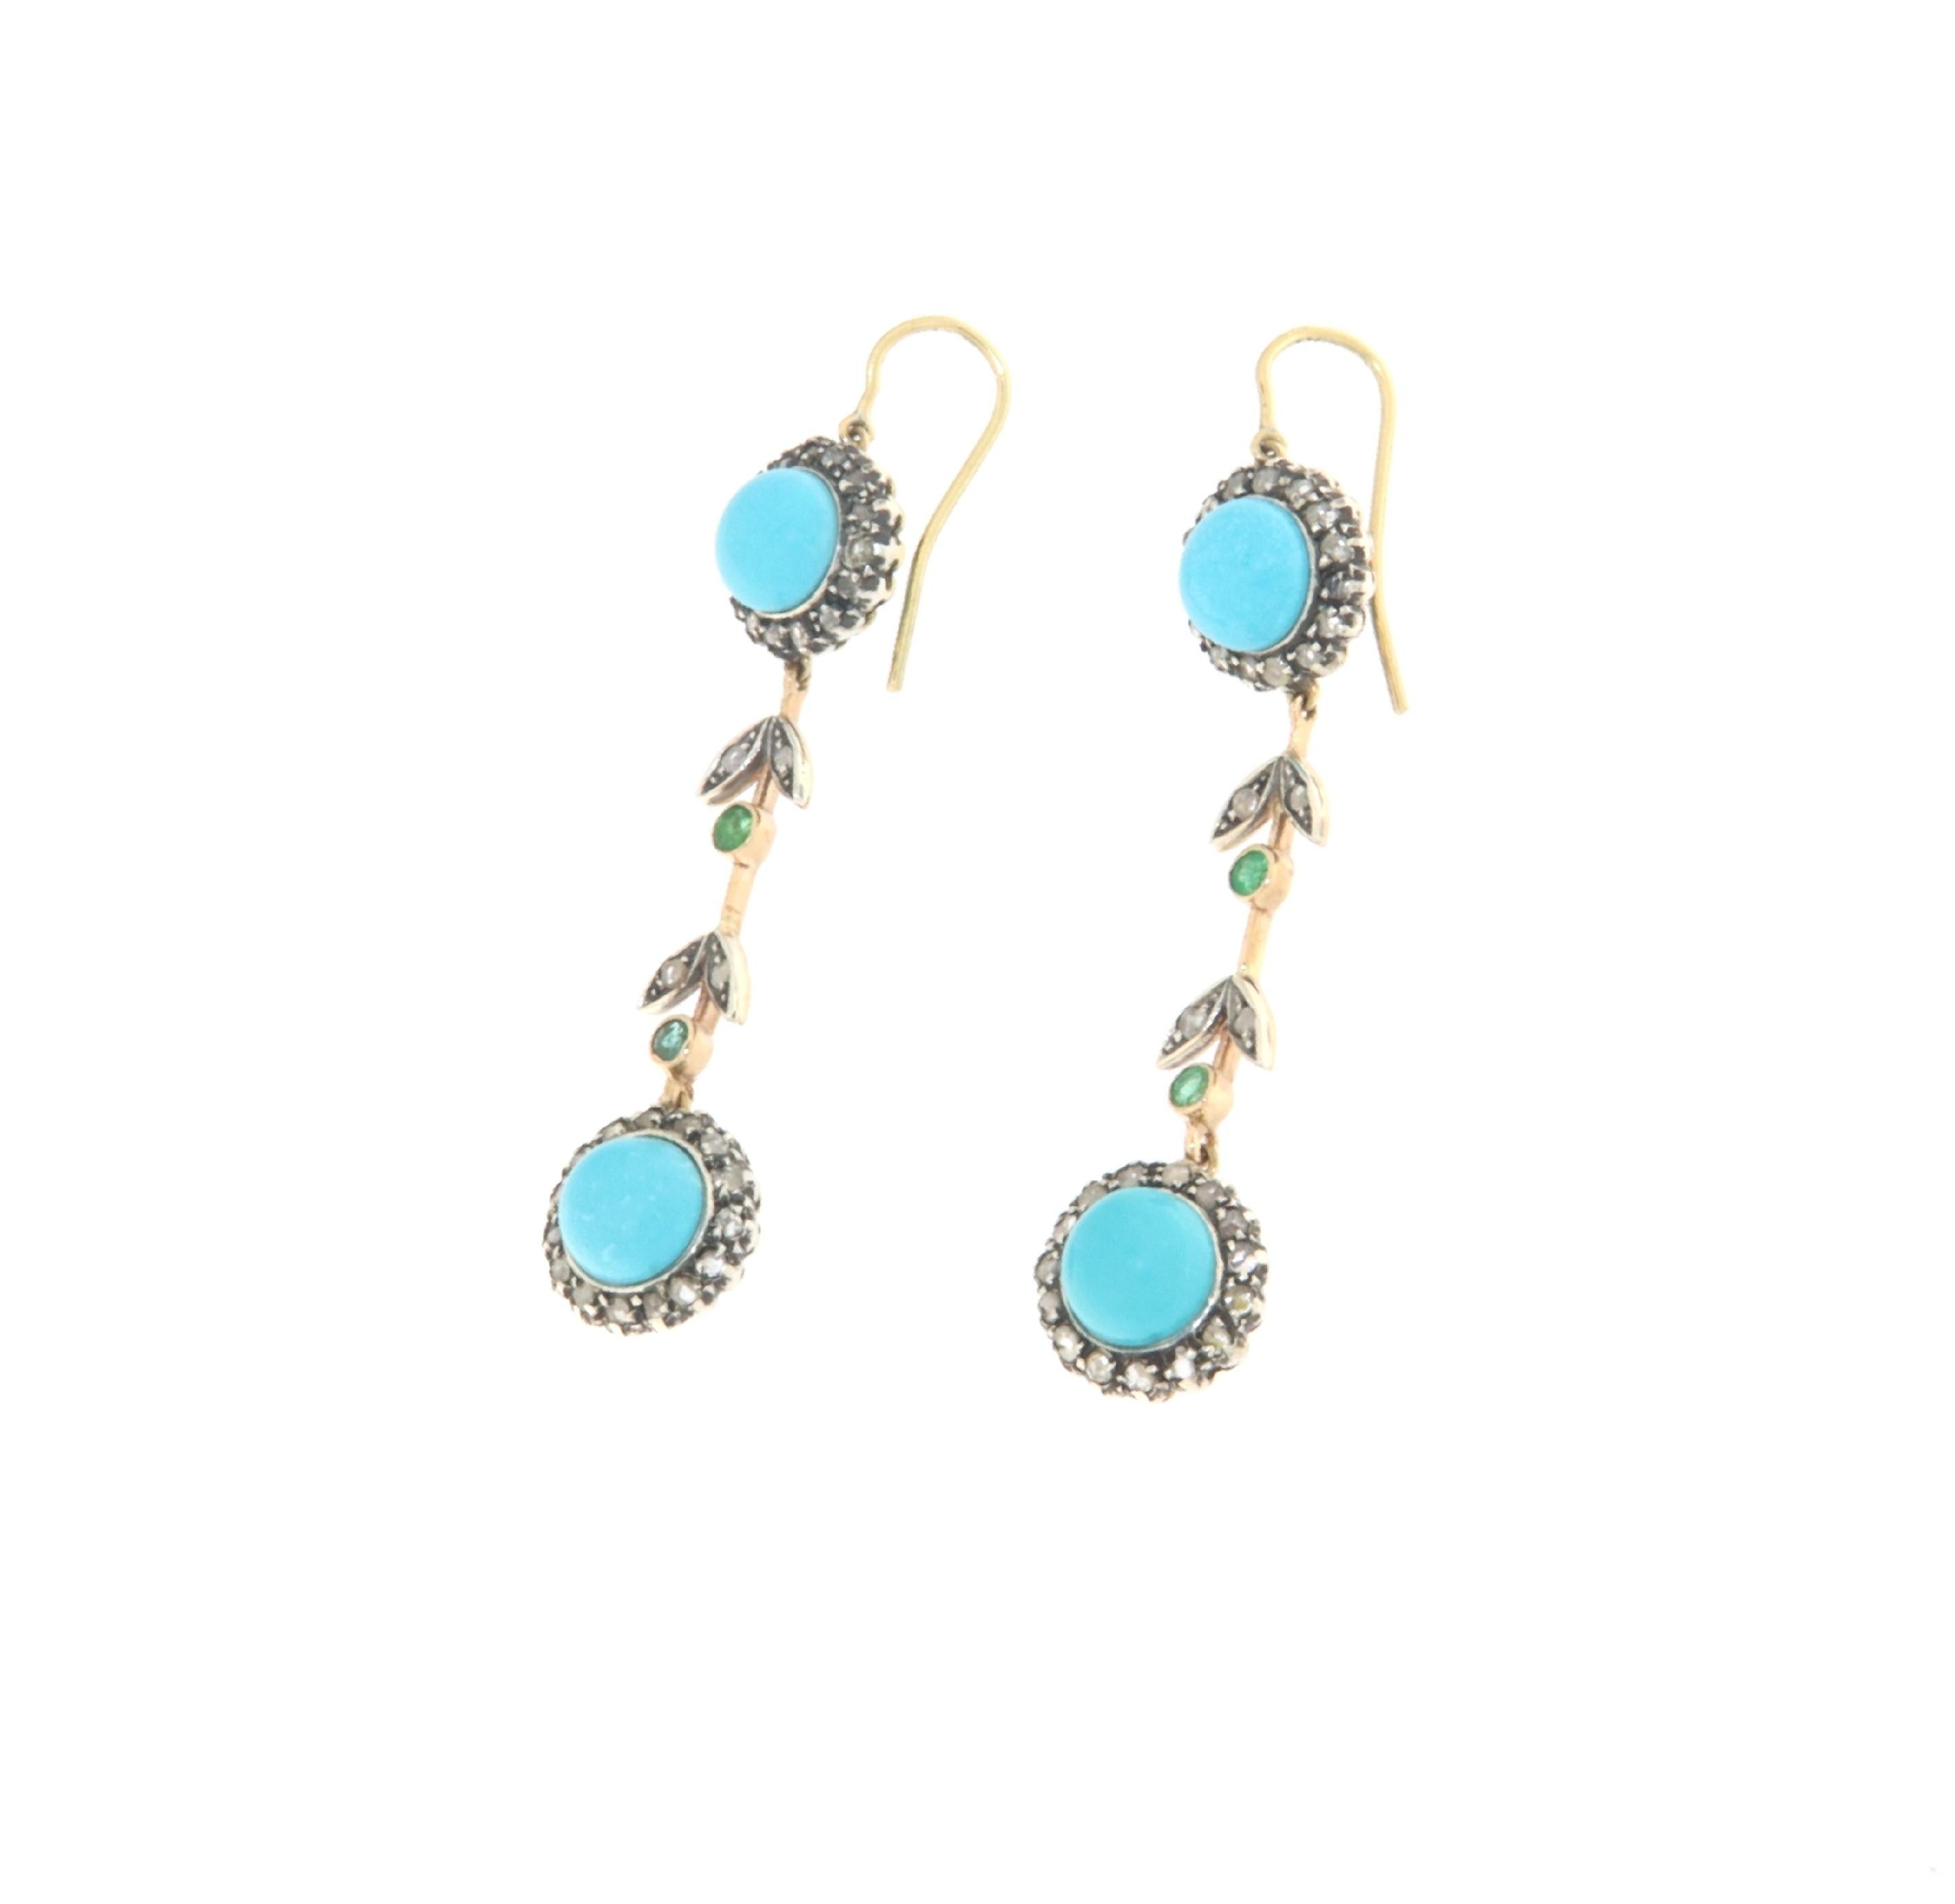 These stunning earrings are a perfect blend of timeless elegance and captivating charm, expertly crafted from 14-karat yellow gold and 800 millesimal silver. Each earring features a combination of antique diamonds, vibrant turquoise, and rich